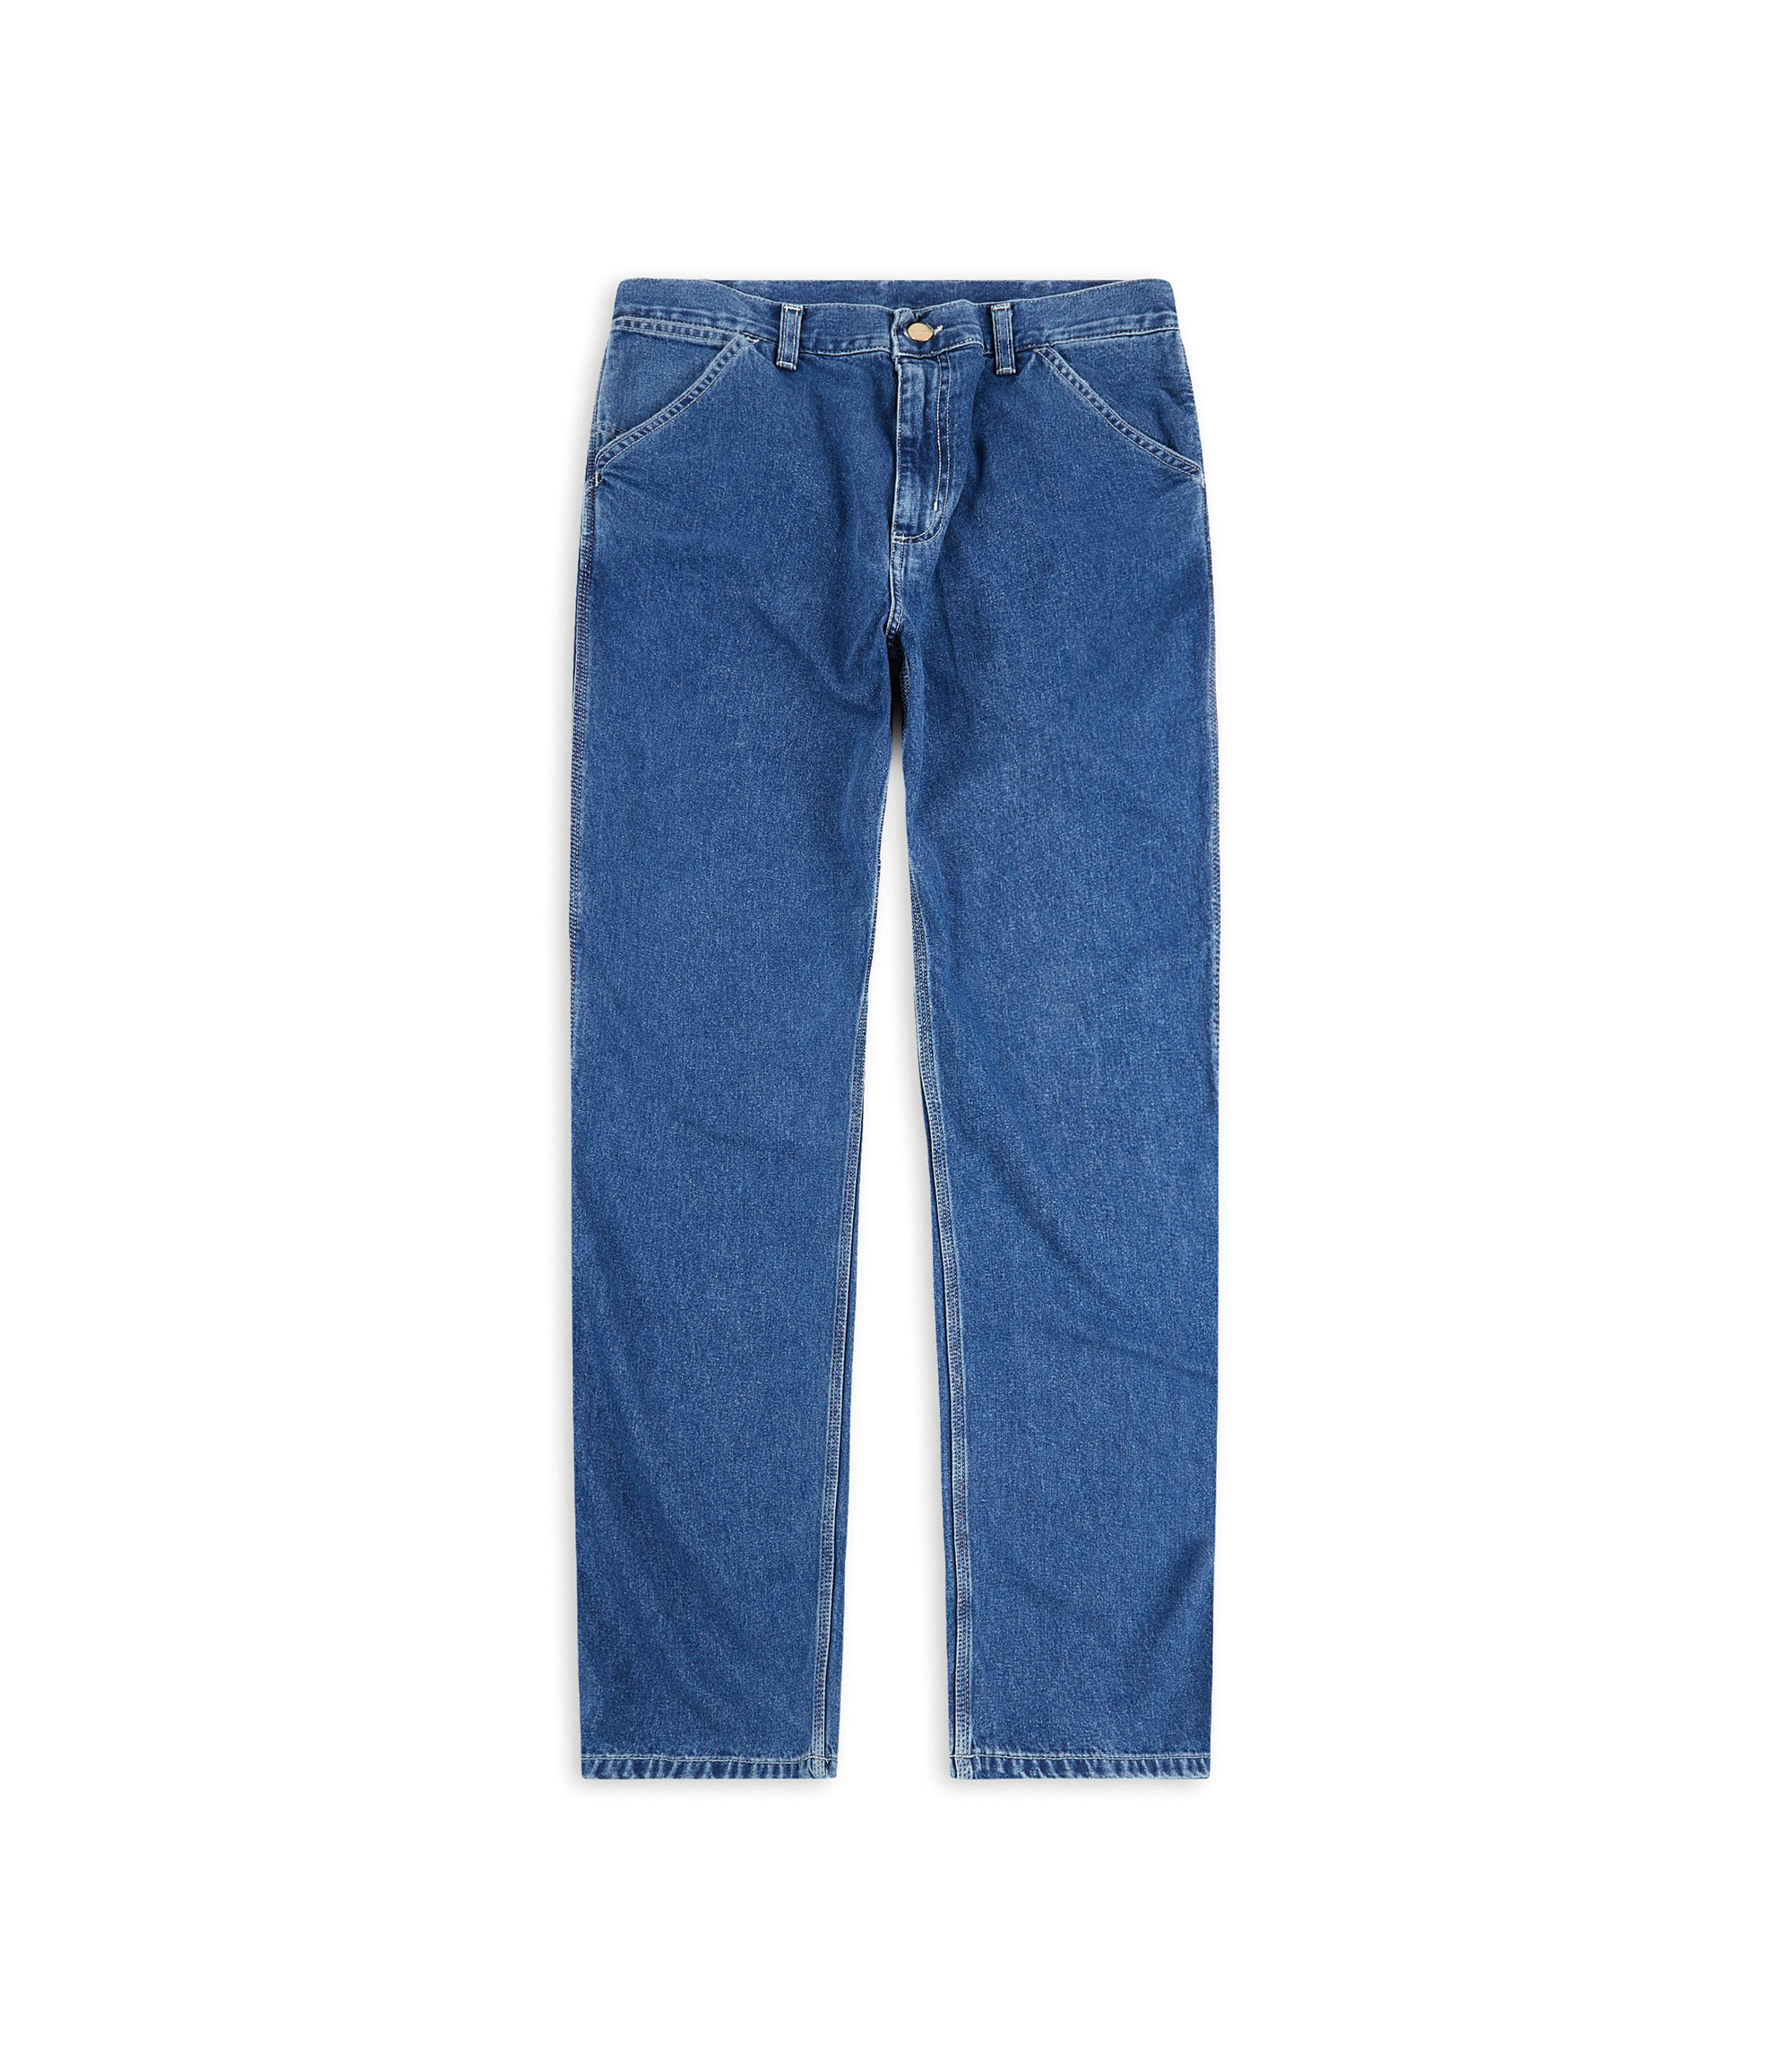 Simple Work Pant - Stone Washed Blue